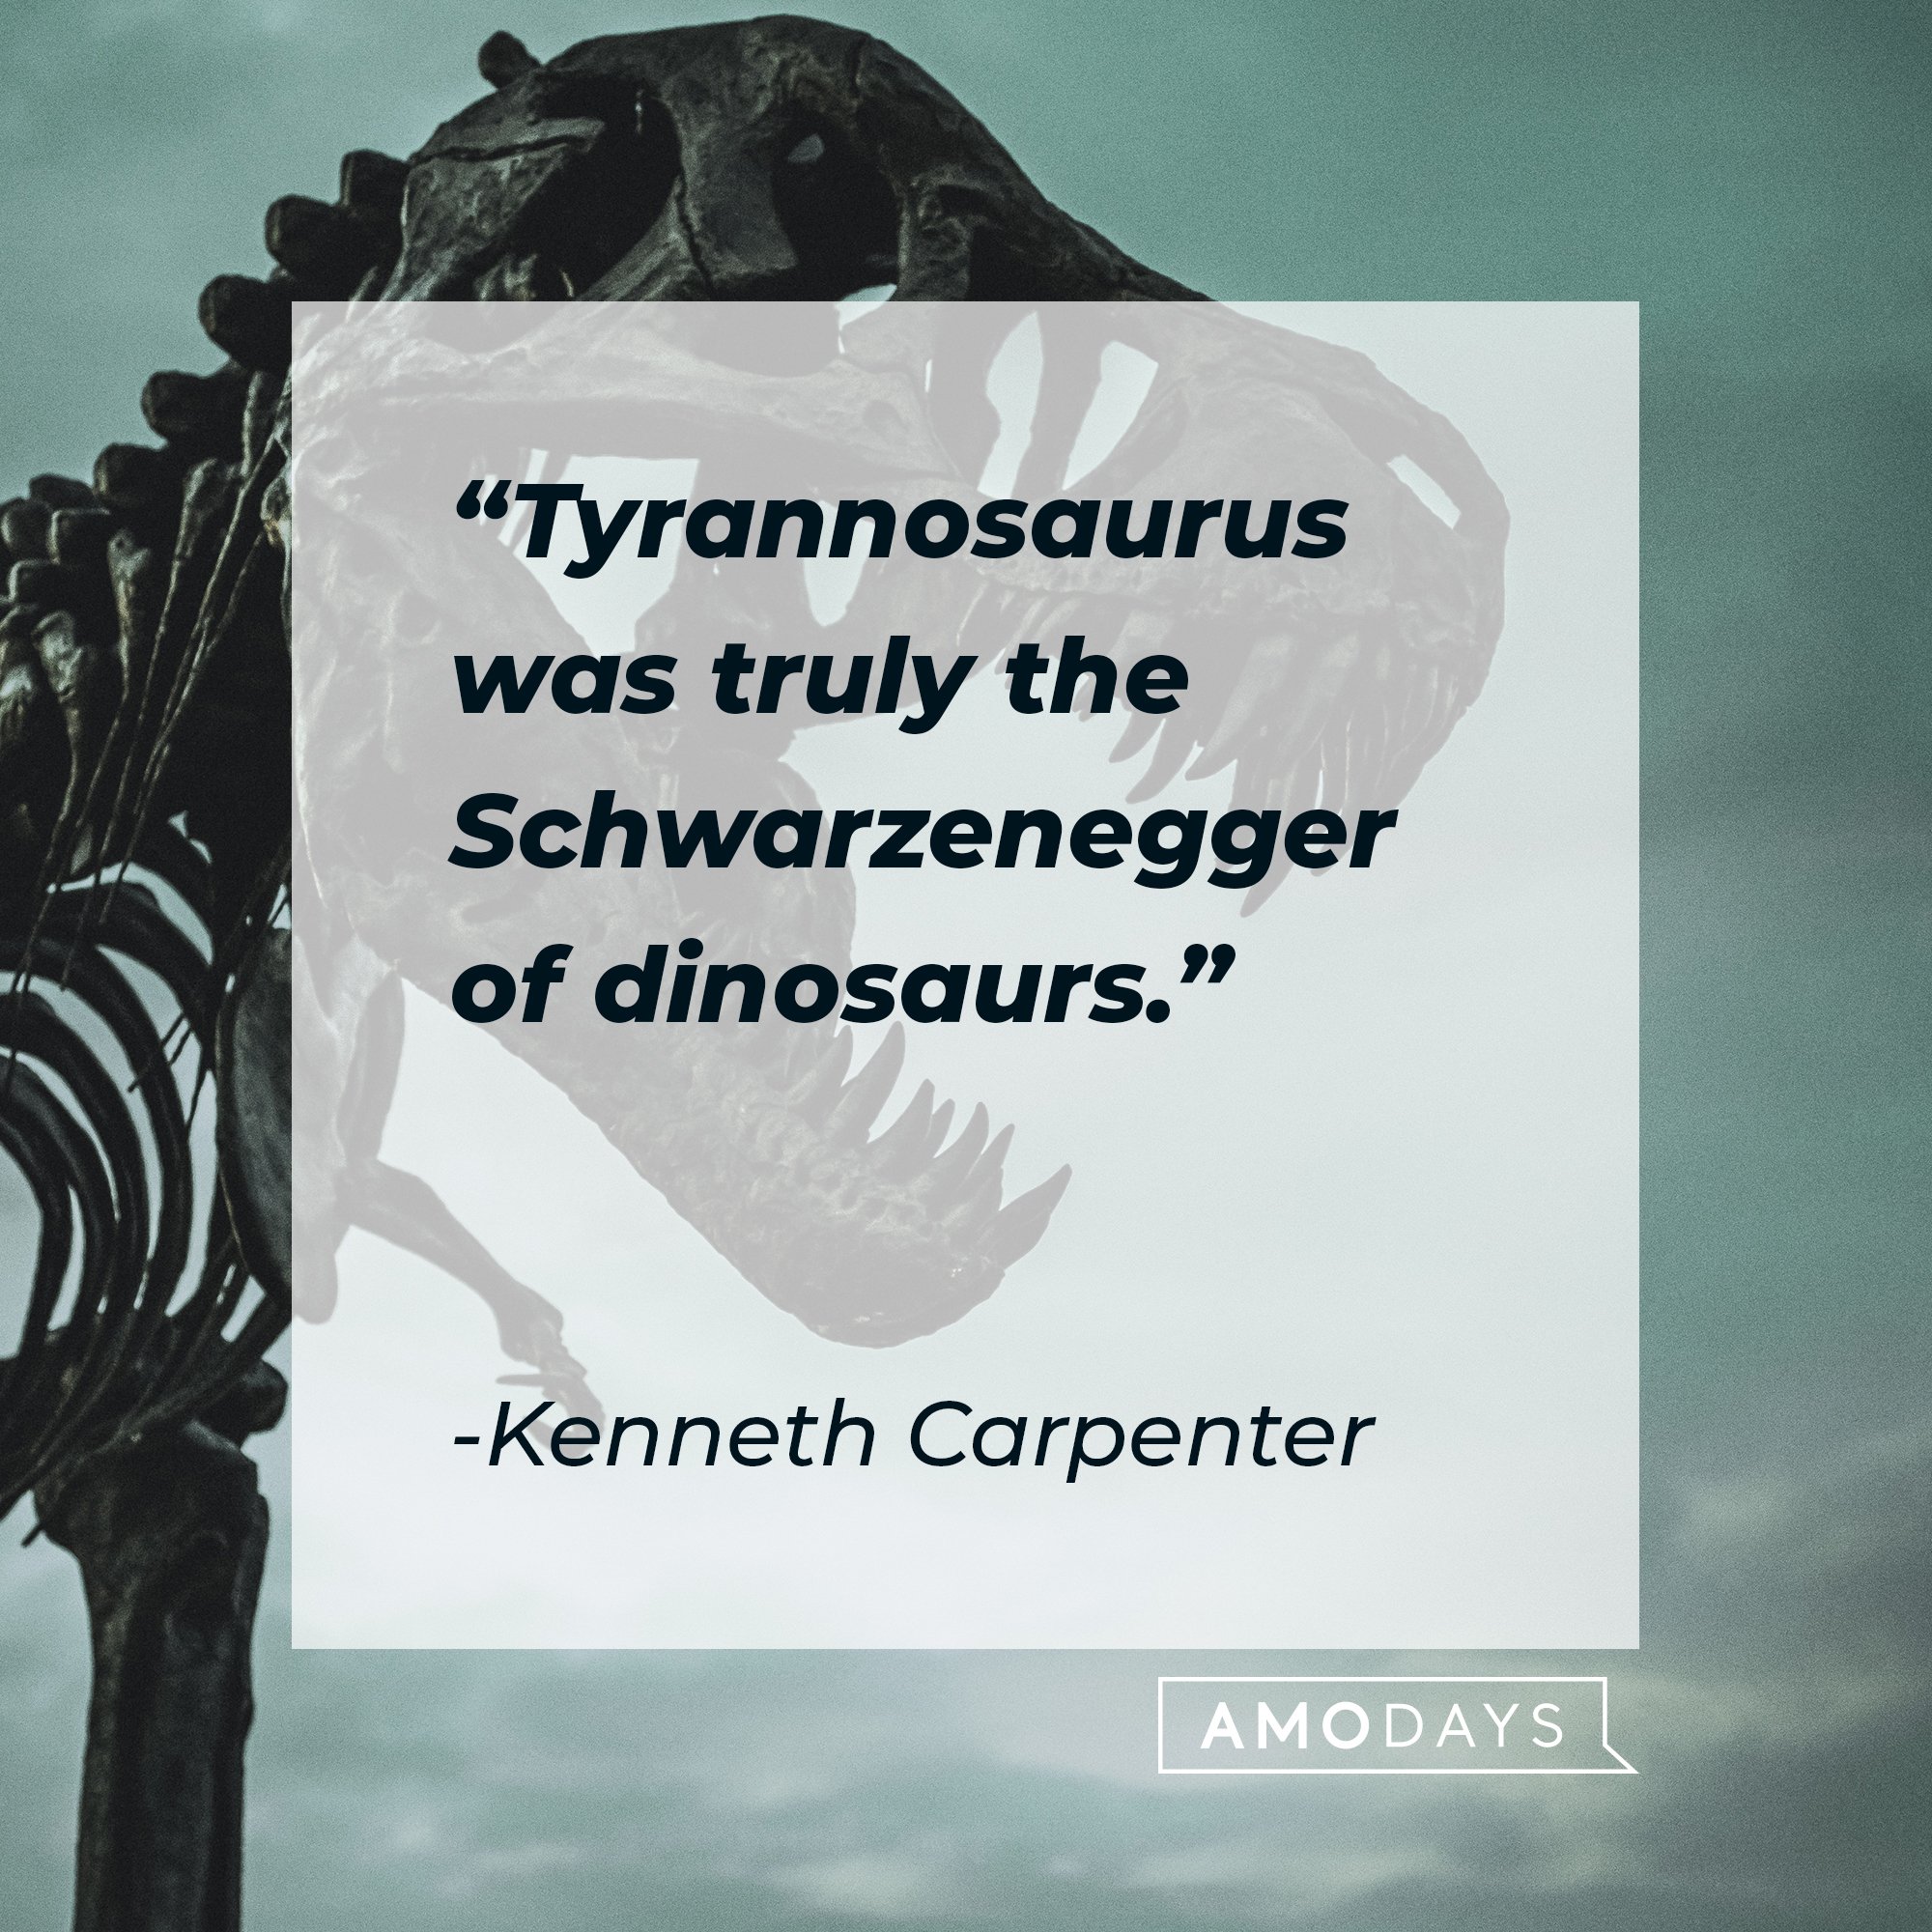 Kenneth Carpenter’s quote: "Tyrannosaurus was truly the Schwarzenegger of dinosaurs." | Image: AmoDays